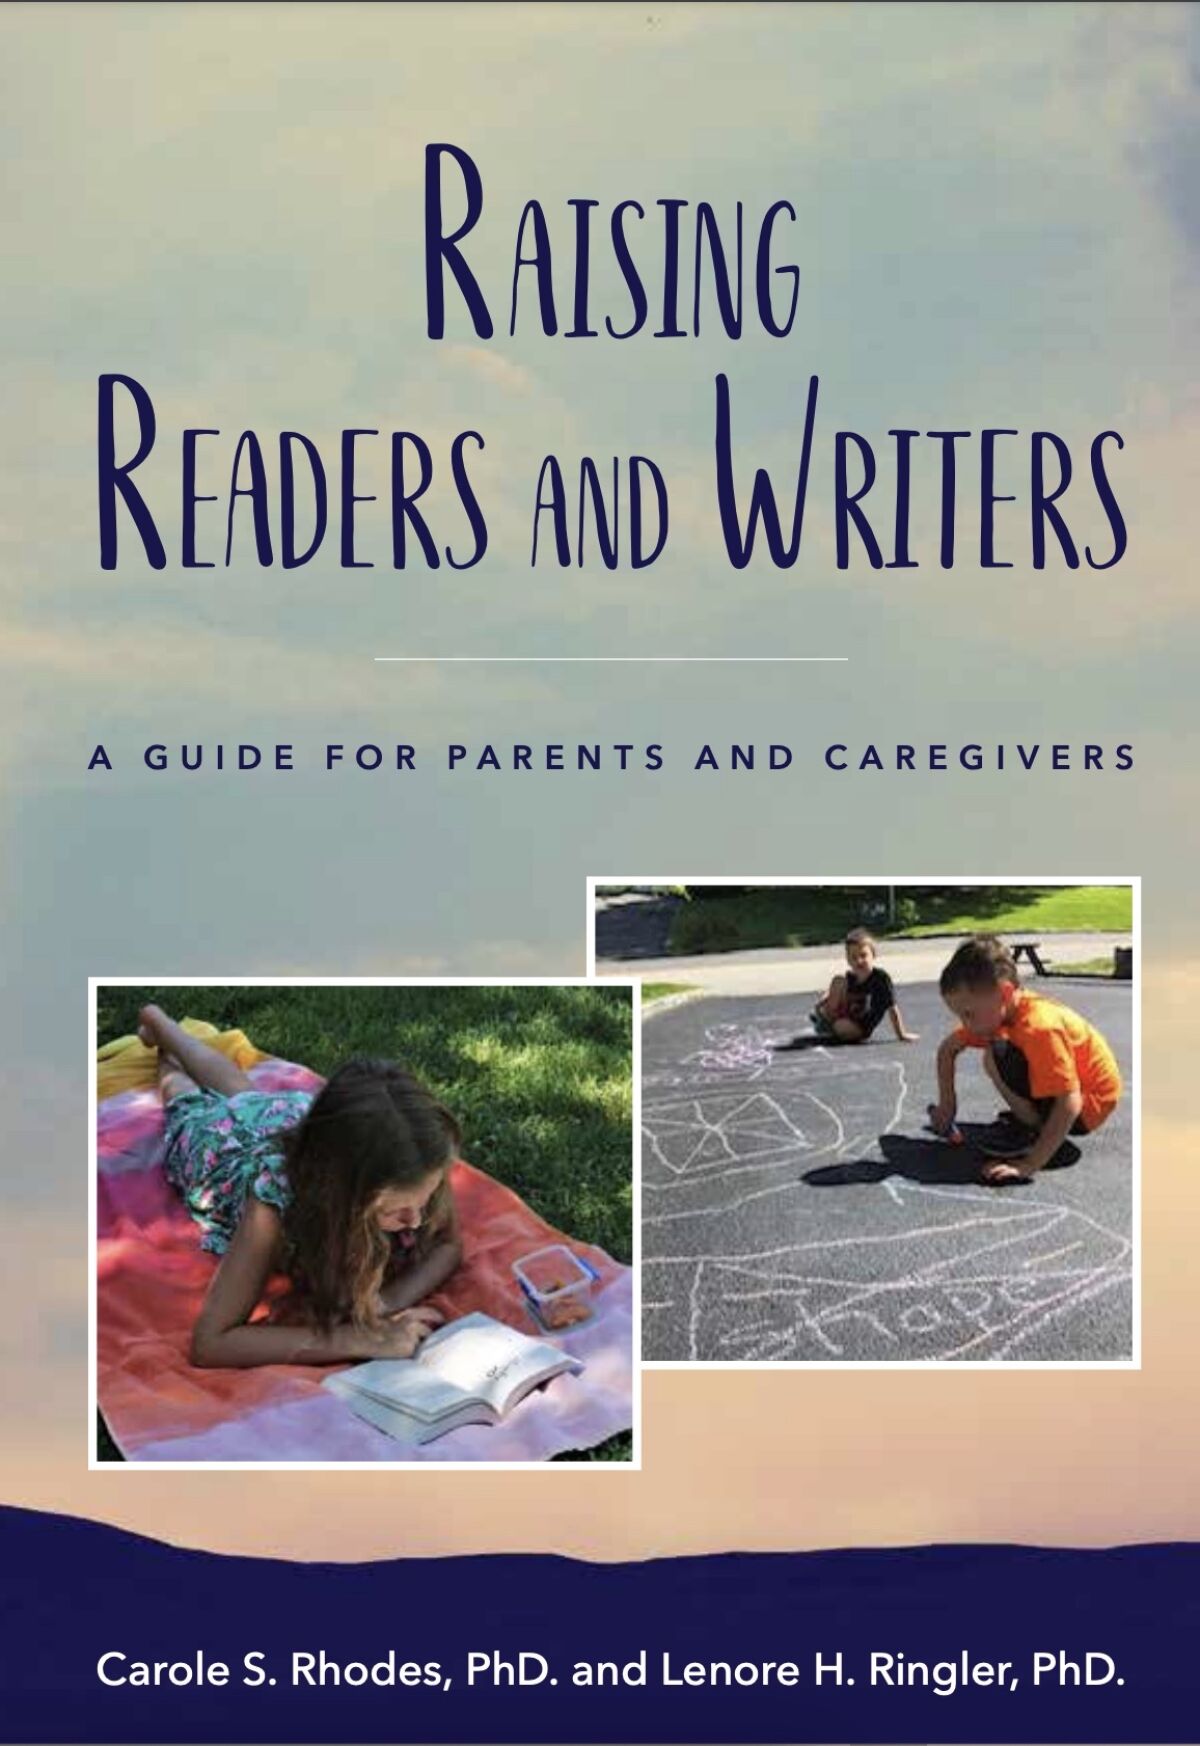 "Raising Readers and Writers," by Carole Rhodes and La Jollan Lenore Ringler, offers advice for nurturing literacy.